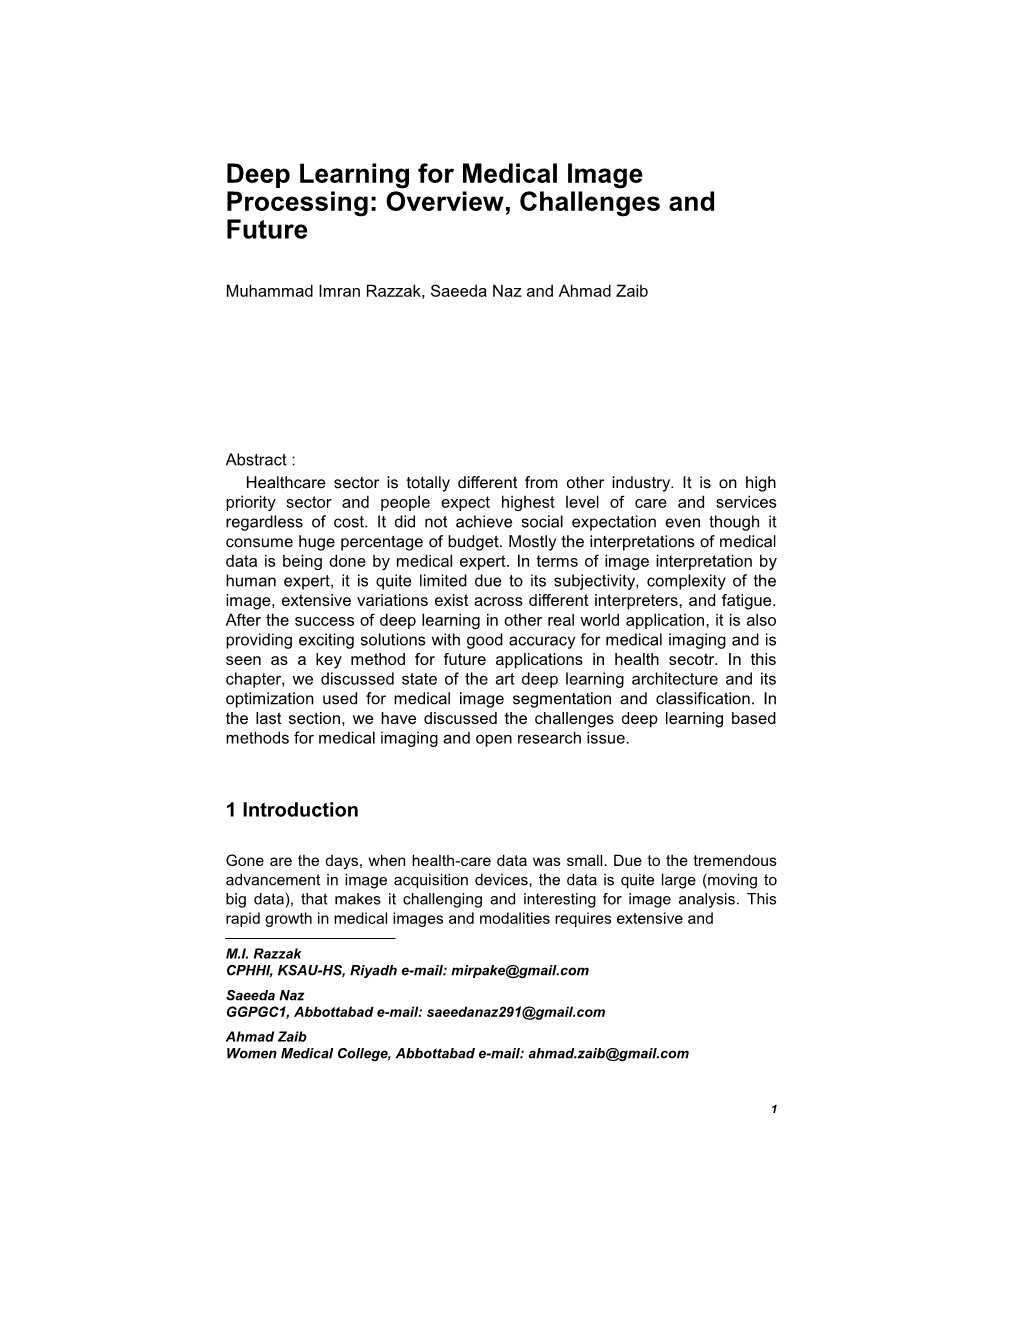 Deep Learning for Medical Image Processing: Overview, Challenges and Future